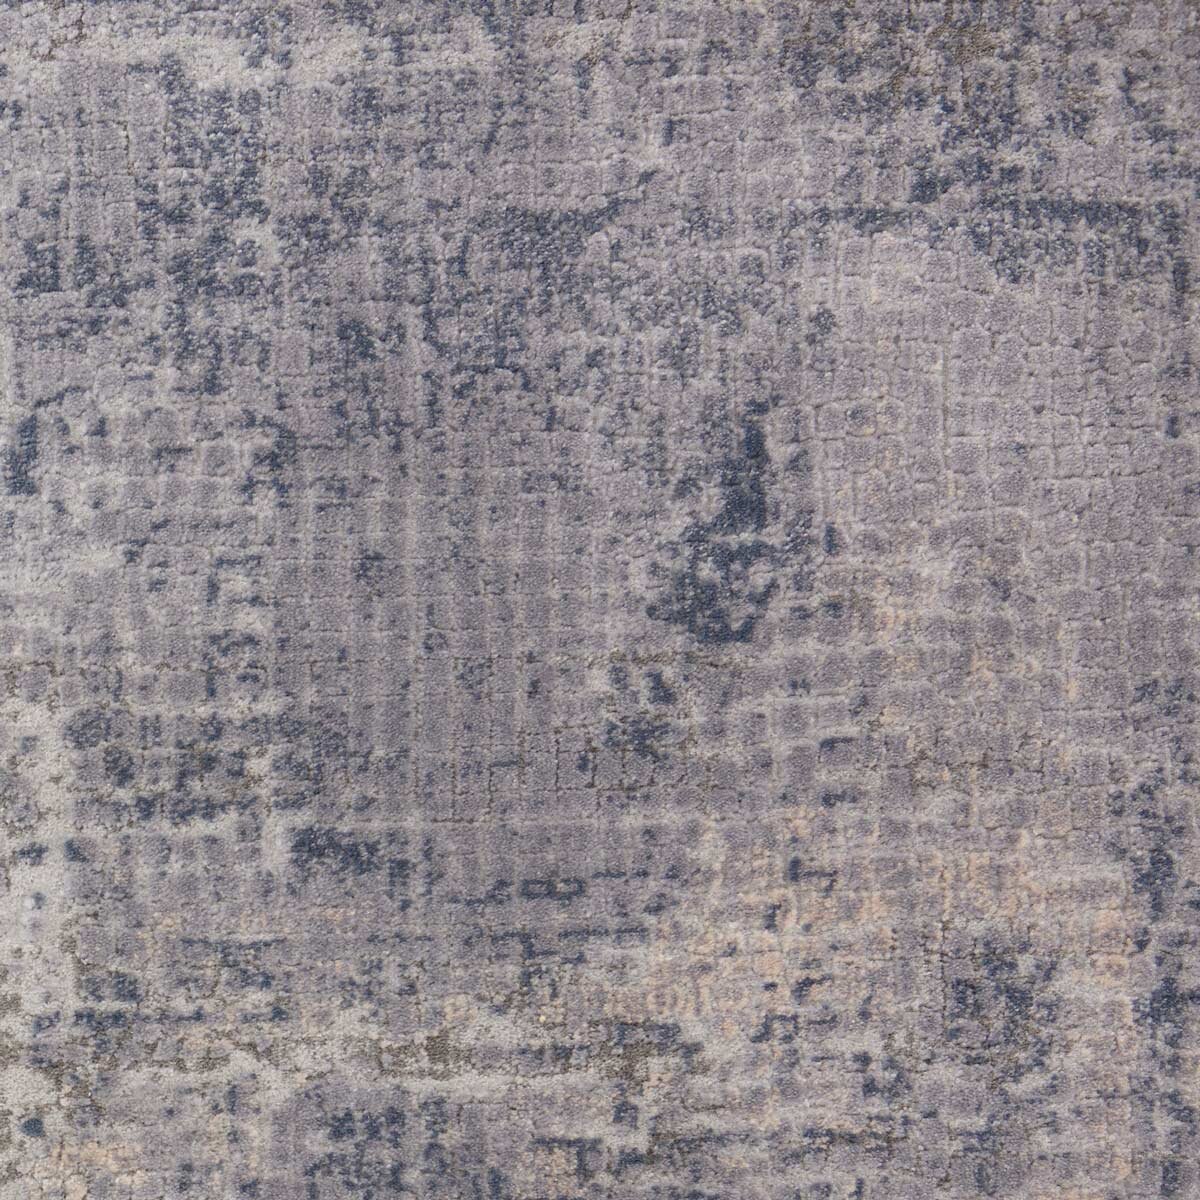 Rustic Textures Faded Blue Runner Rug